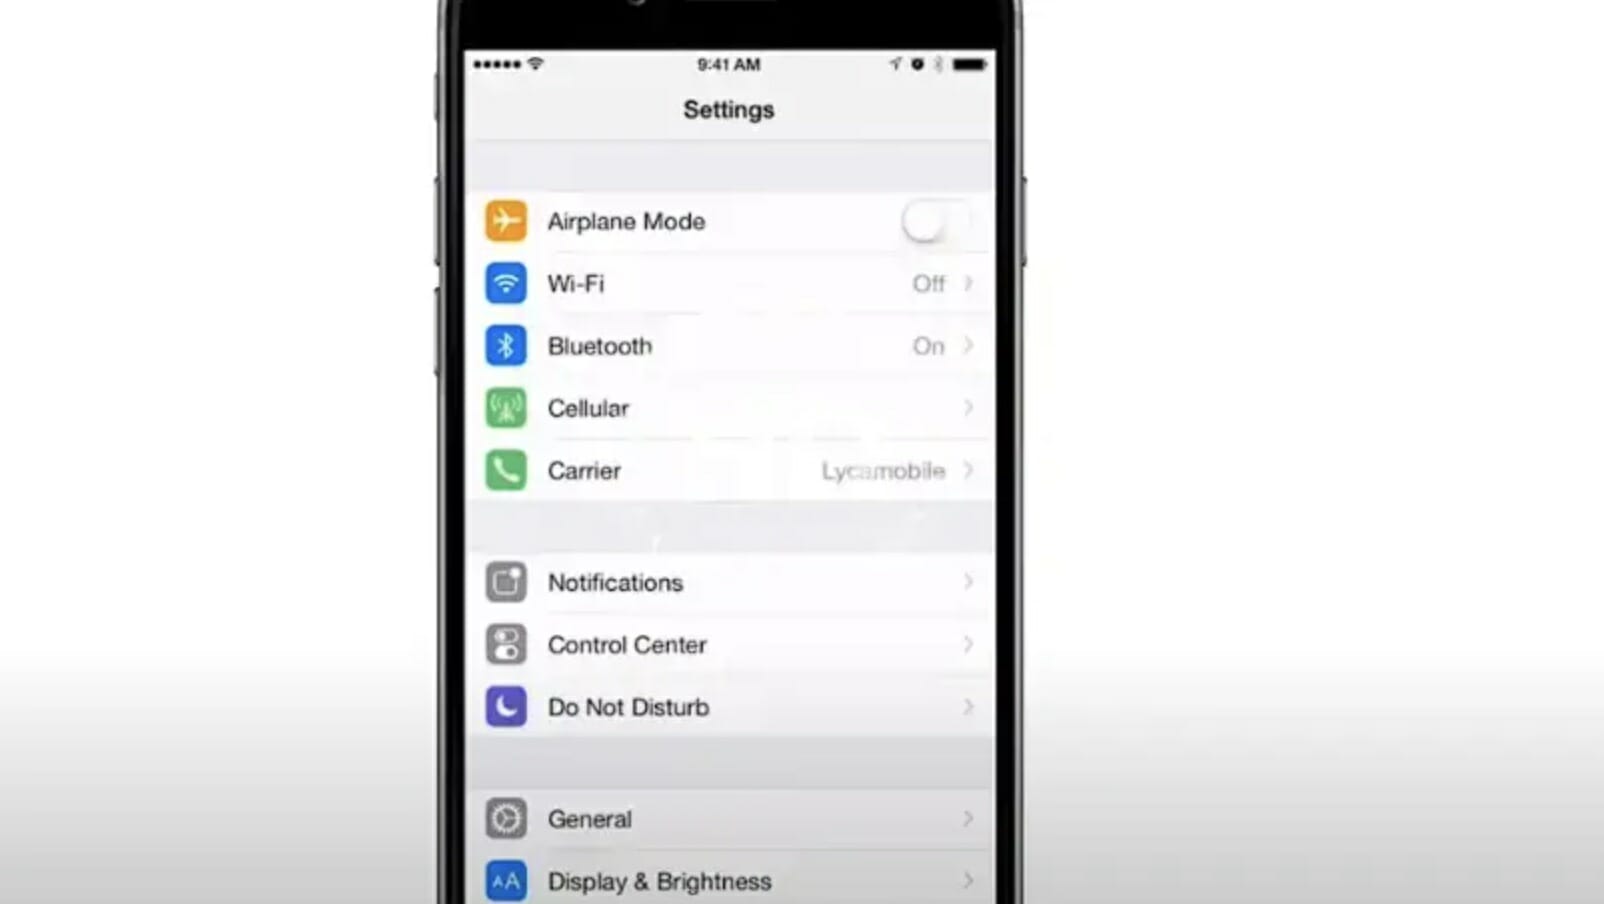 List of settings on an iphone